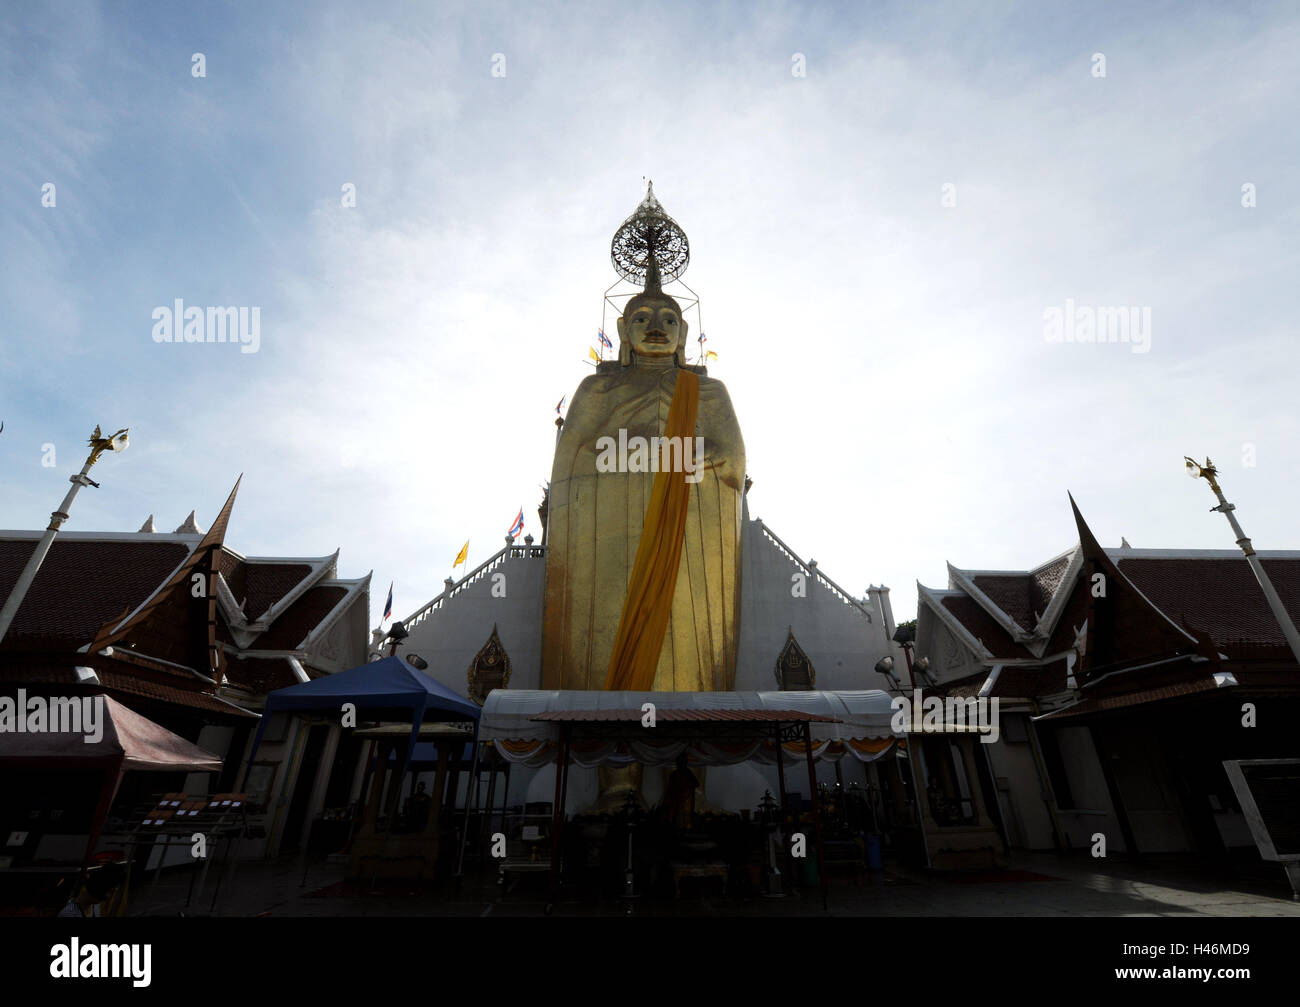 Buddha, temple, sky, Thailand, tourism, travel, religion, faith, Buddhism, statue, figure, golden, decorated, culture, building, outdoors, backlight, Stock Photo